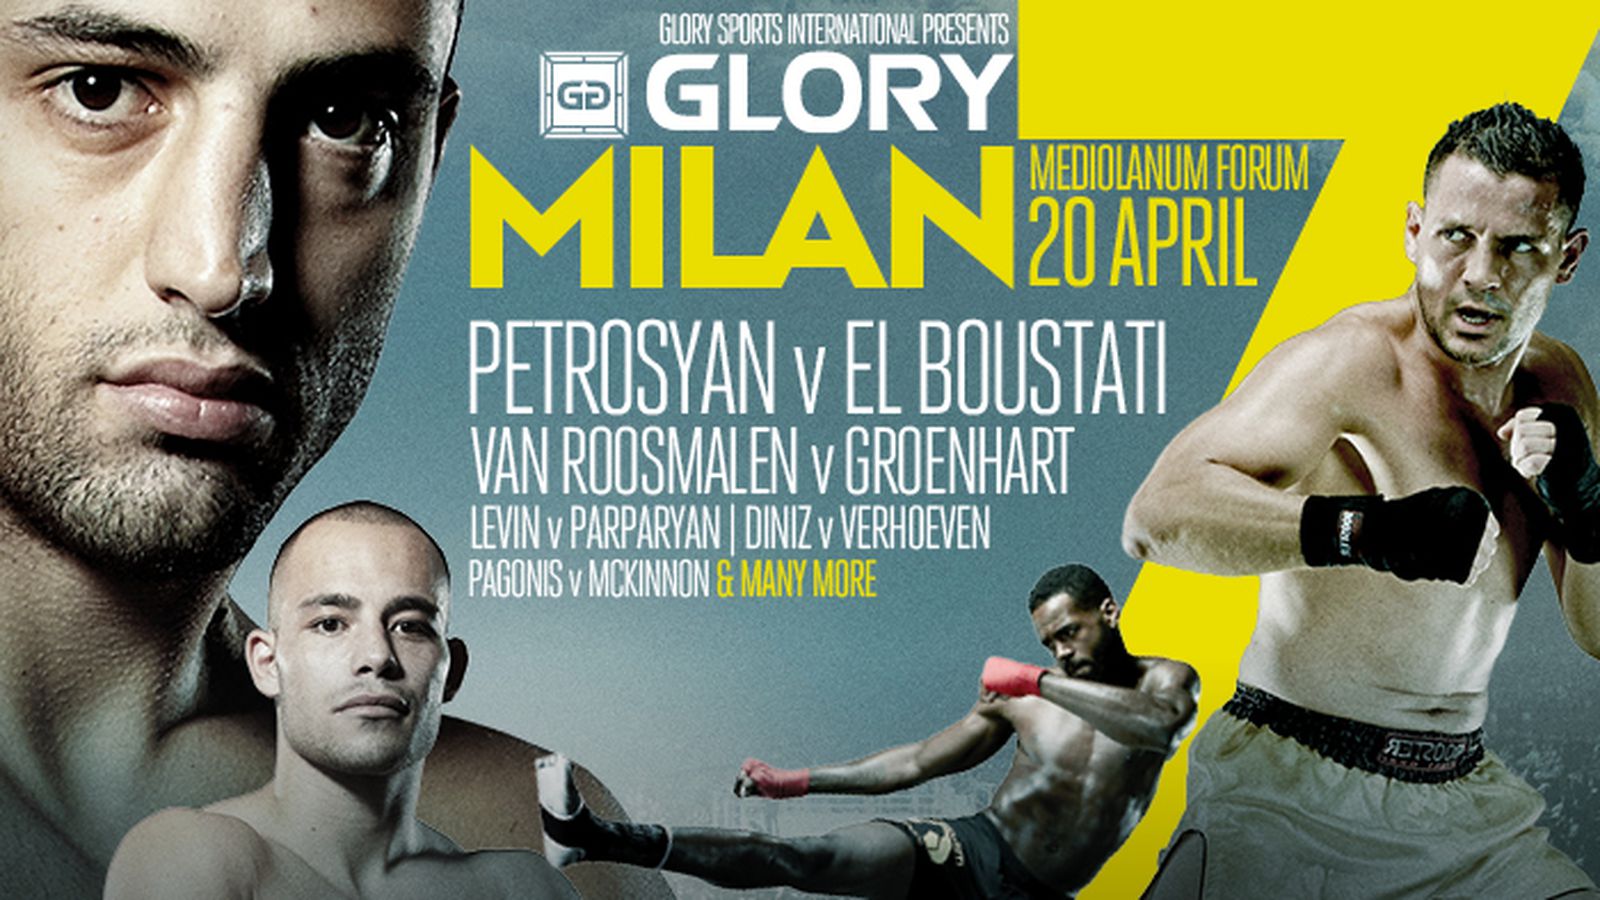 Watch GLORY 7 online video live stream from Milan this Saturday (April 20) on MMAmania.com ...